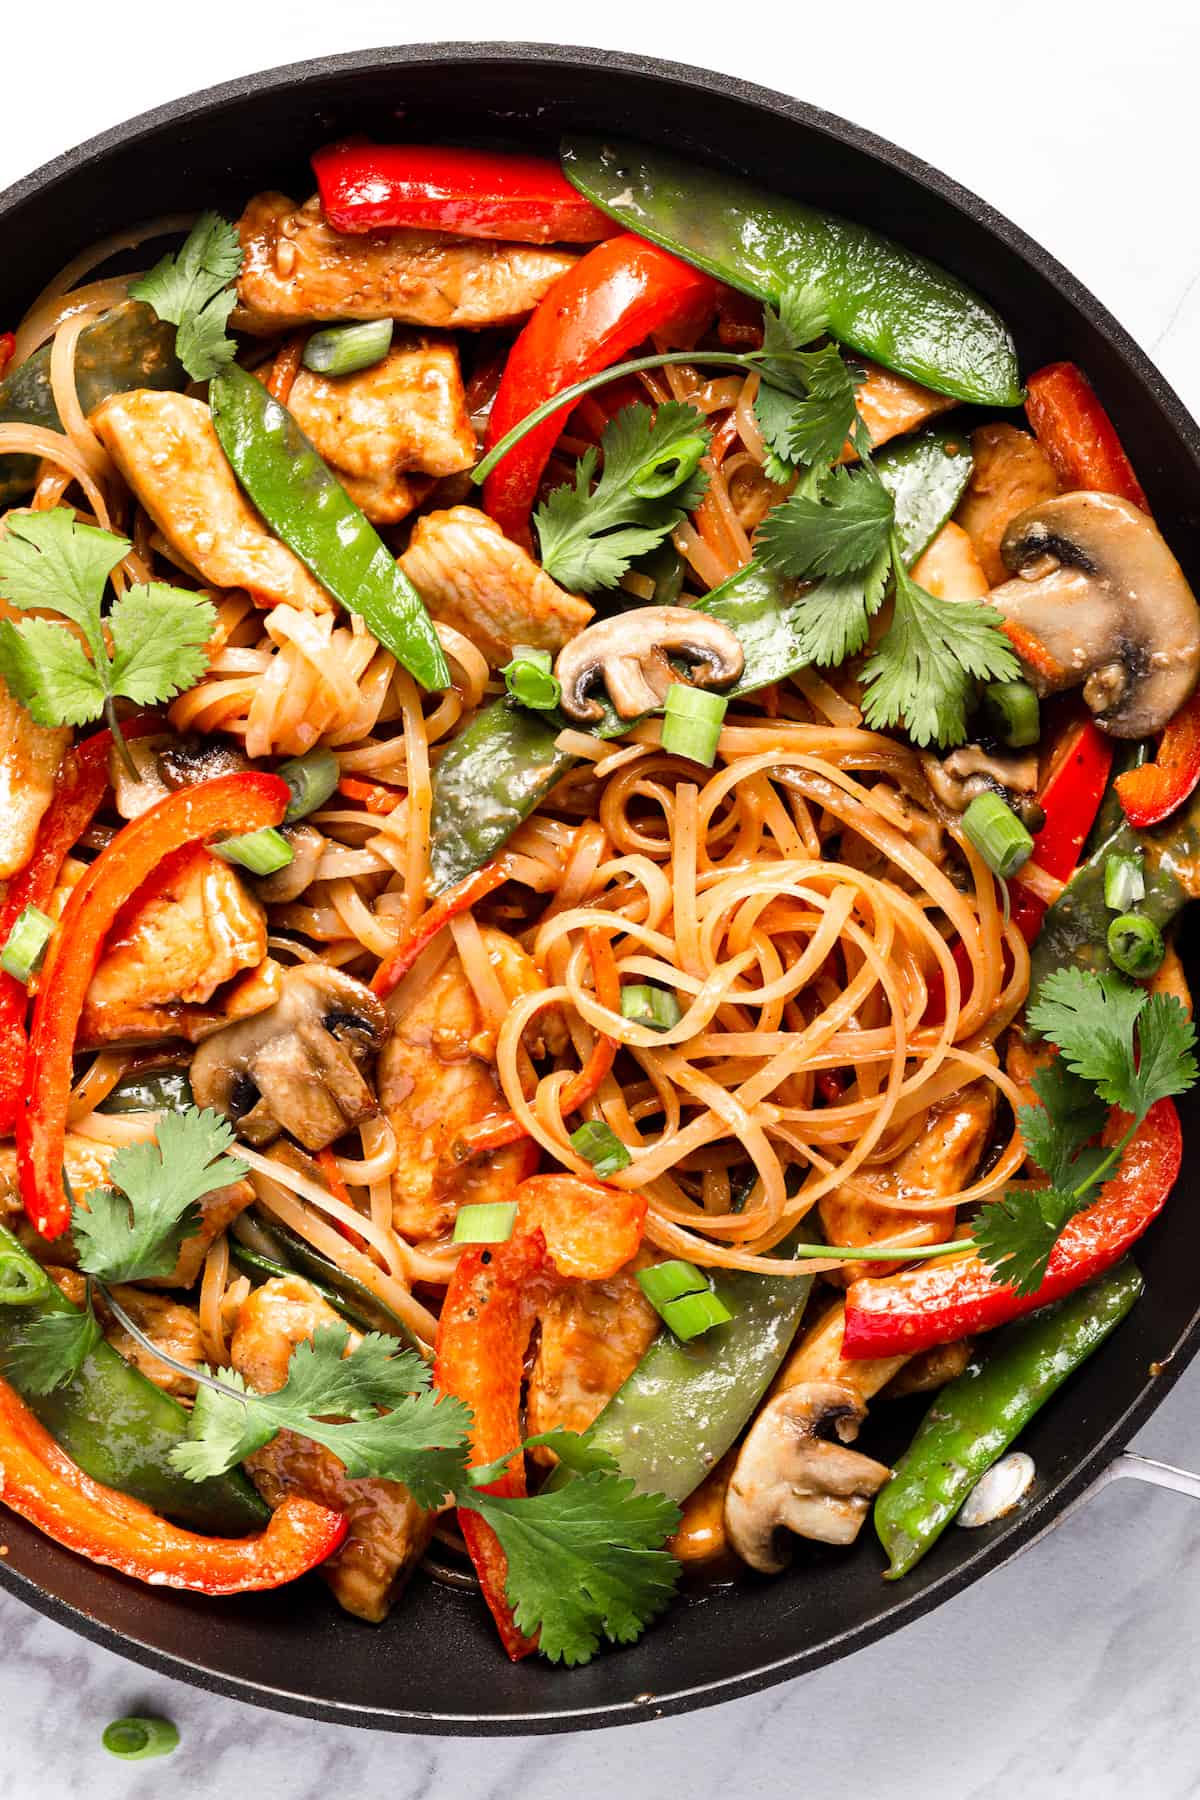 Chicken Lo Mein with Veggies in a Black Skillet on the Counter